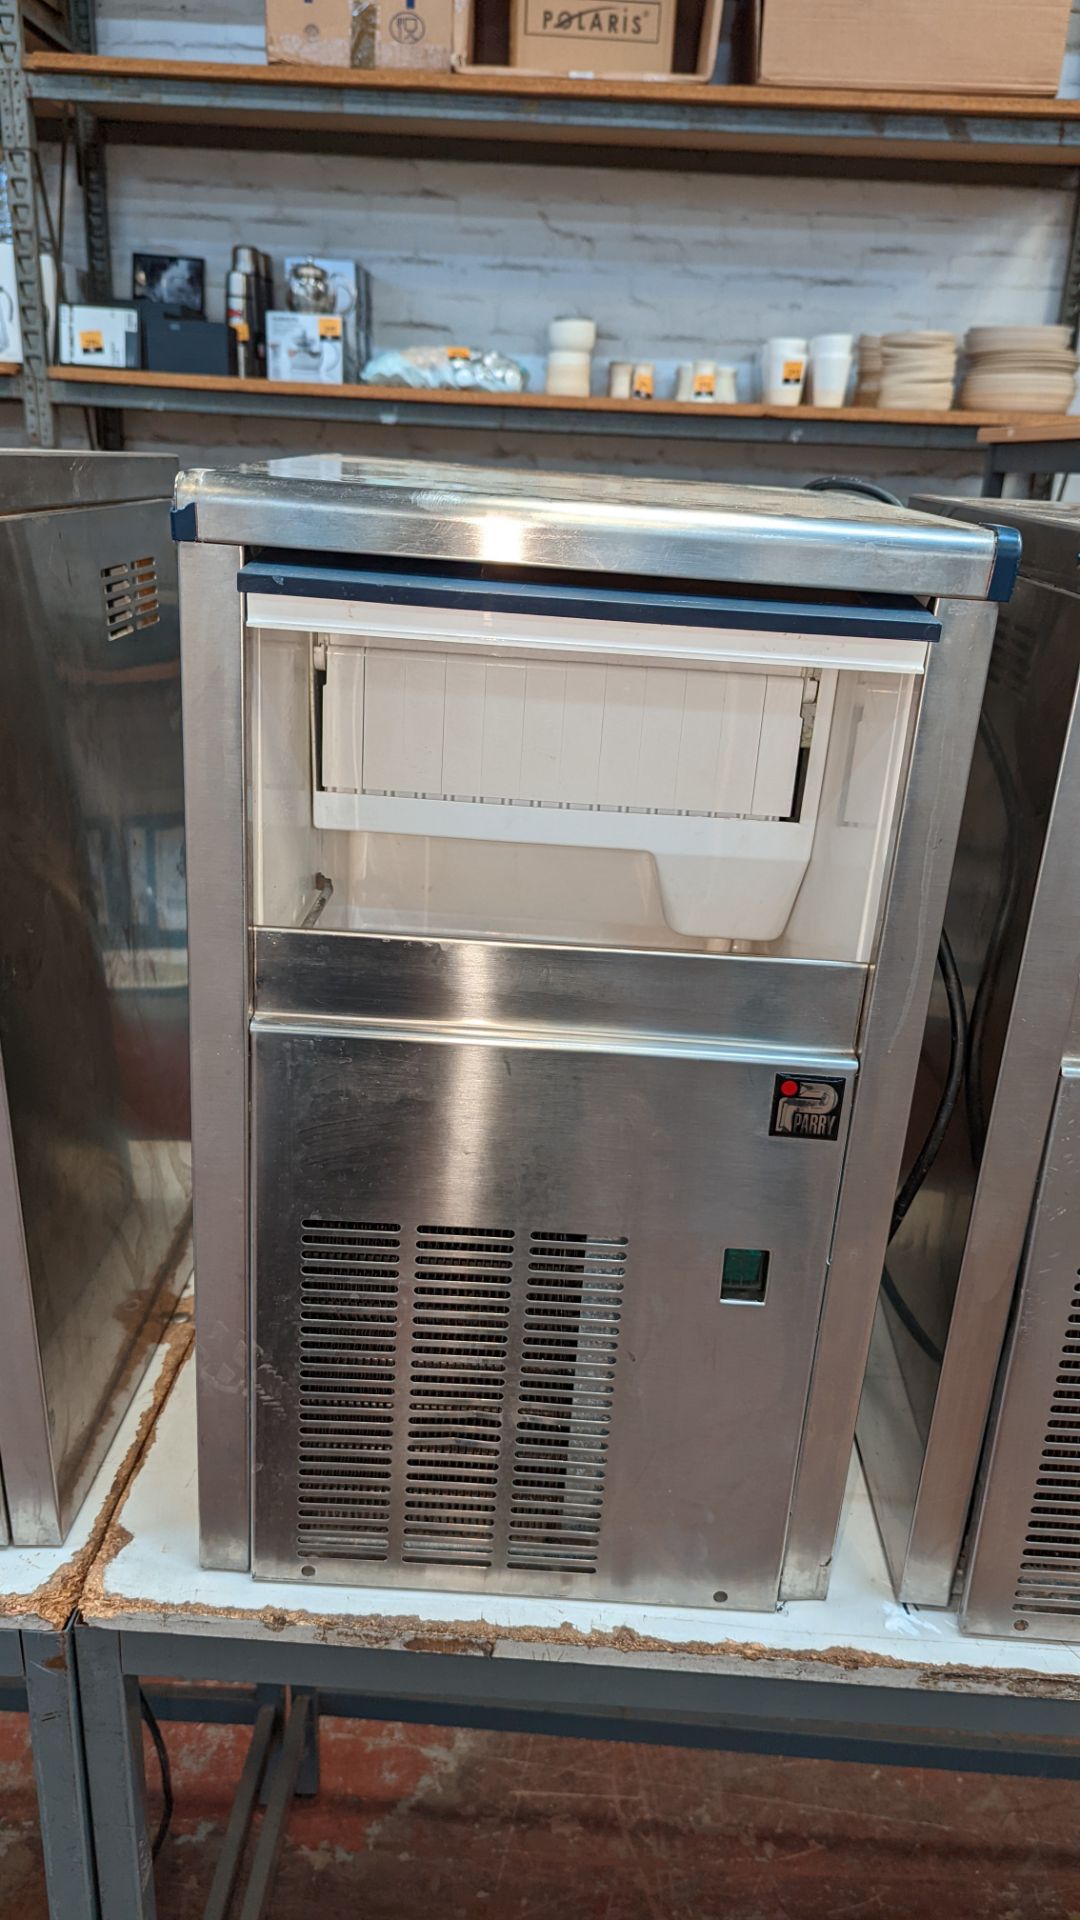 Parry stainless steel compact commercial ice maker model PIM20 - Image 4 of 5